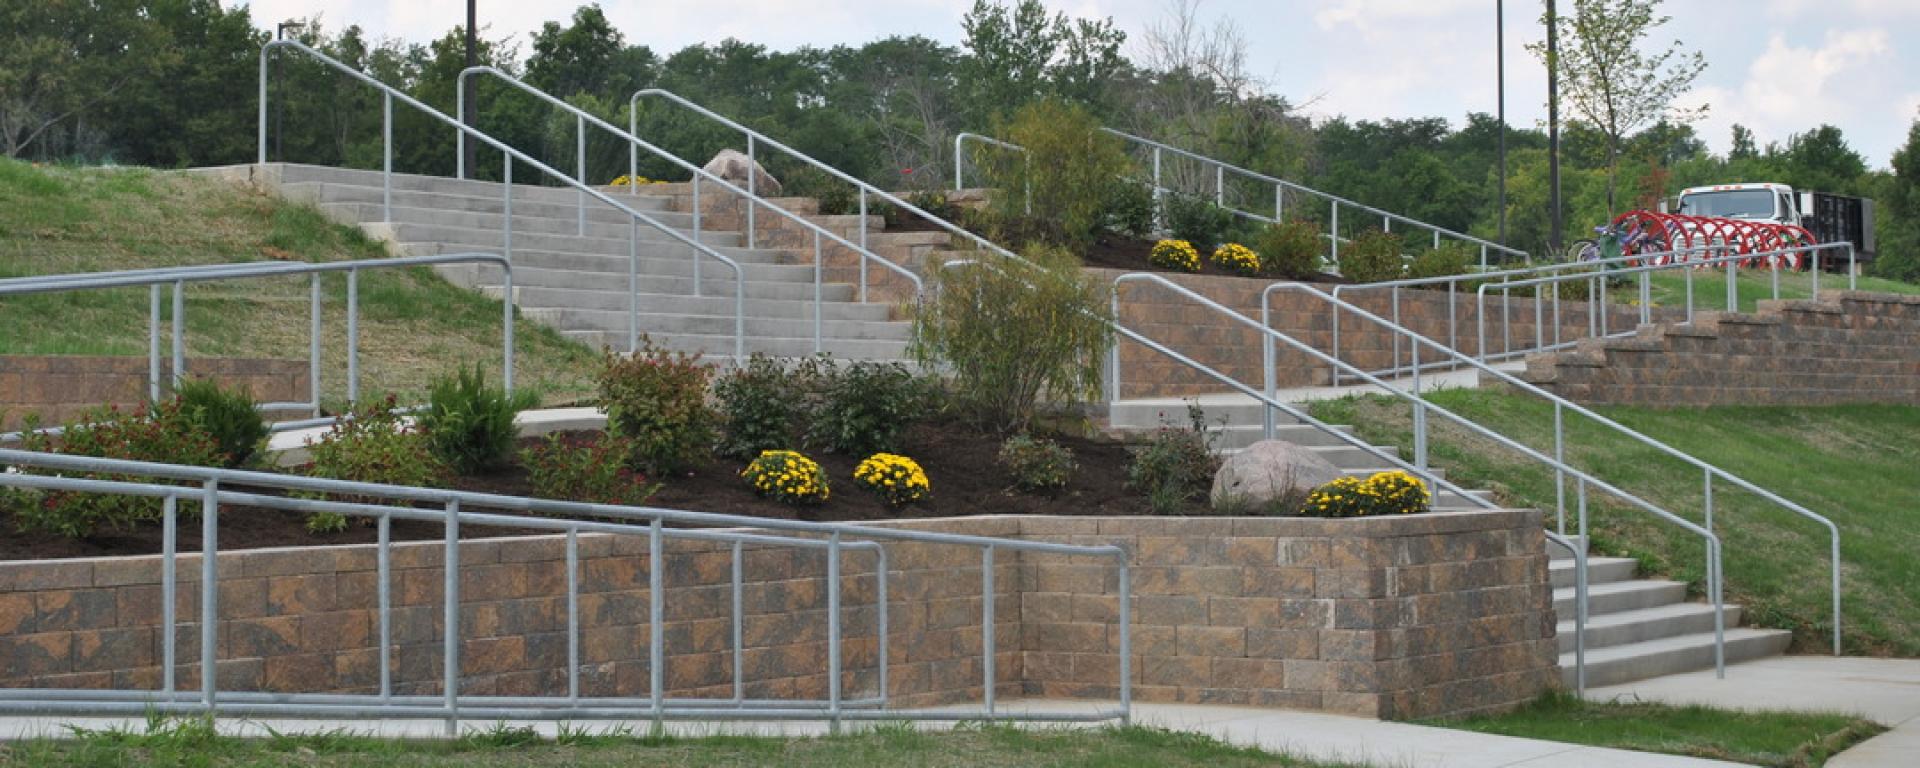 stairs and landscaping outside school